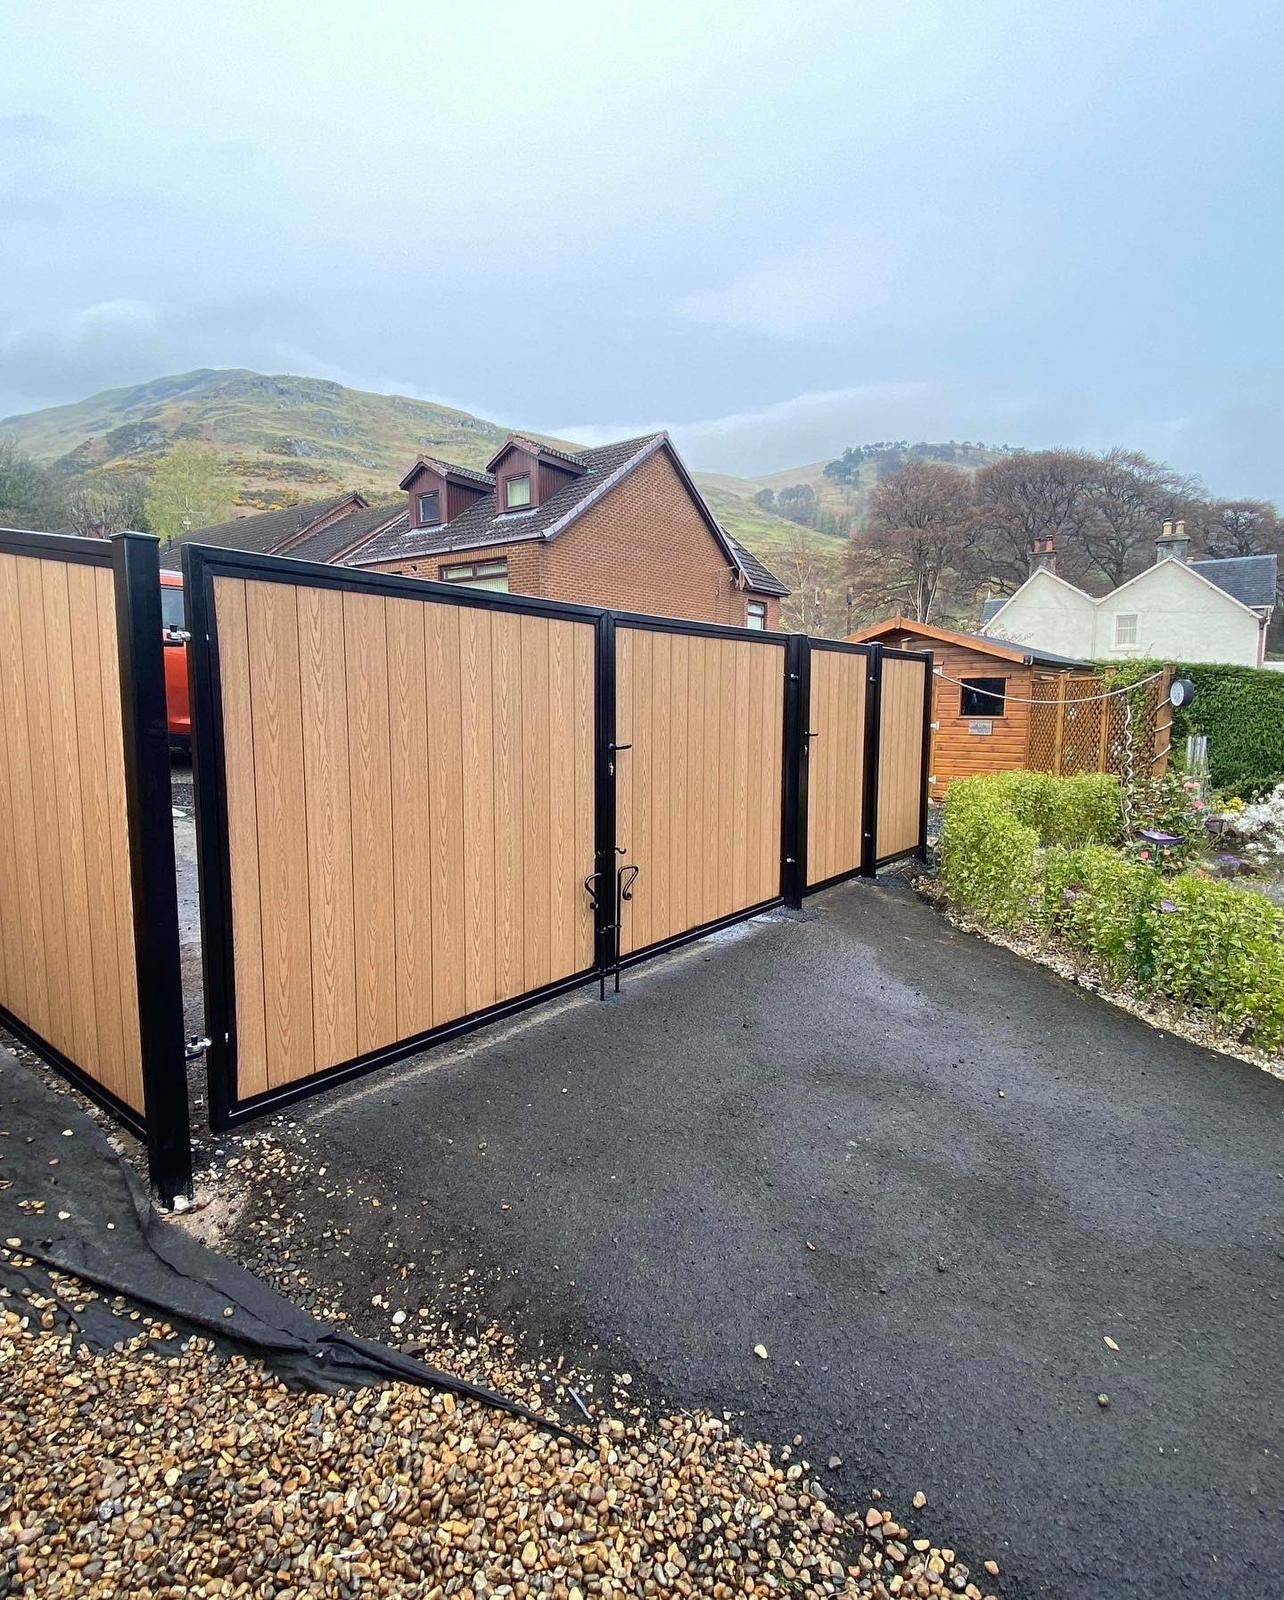 Composite Driveway Gate - Supply & Fit